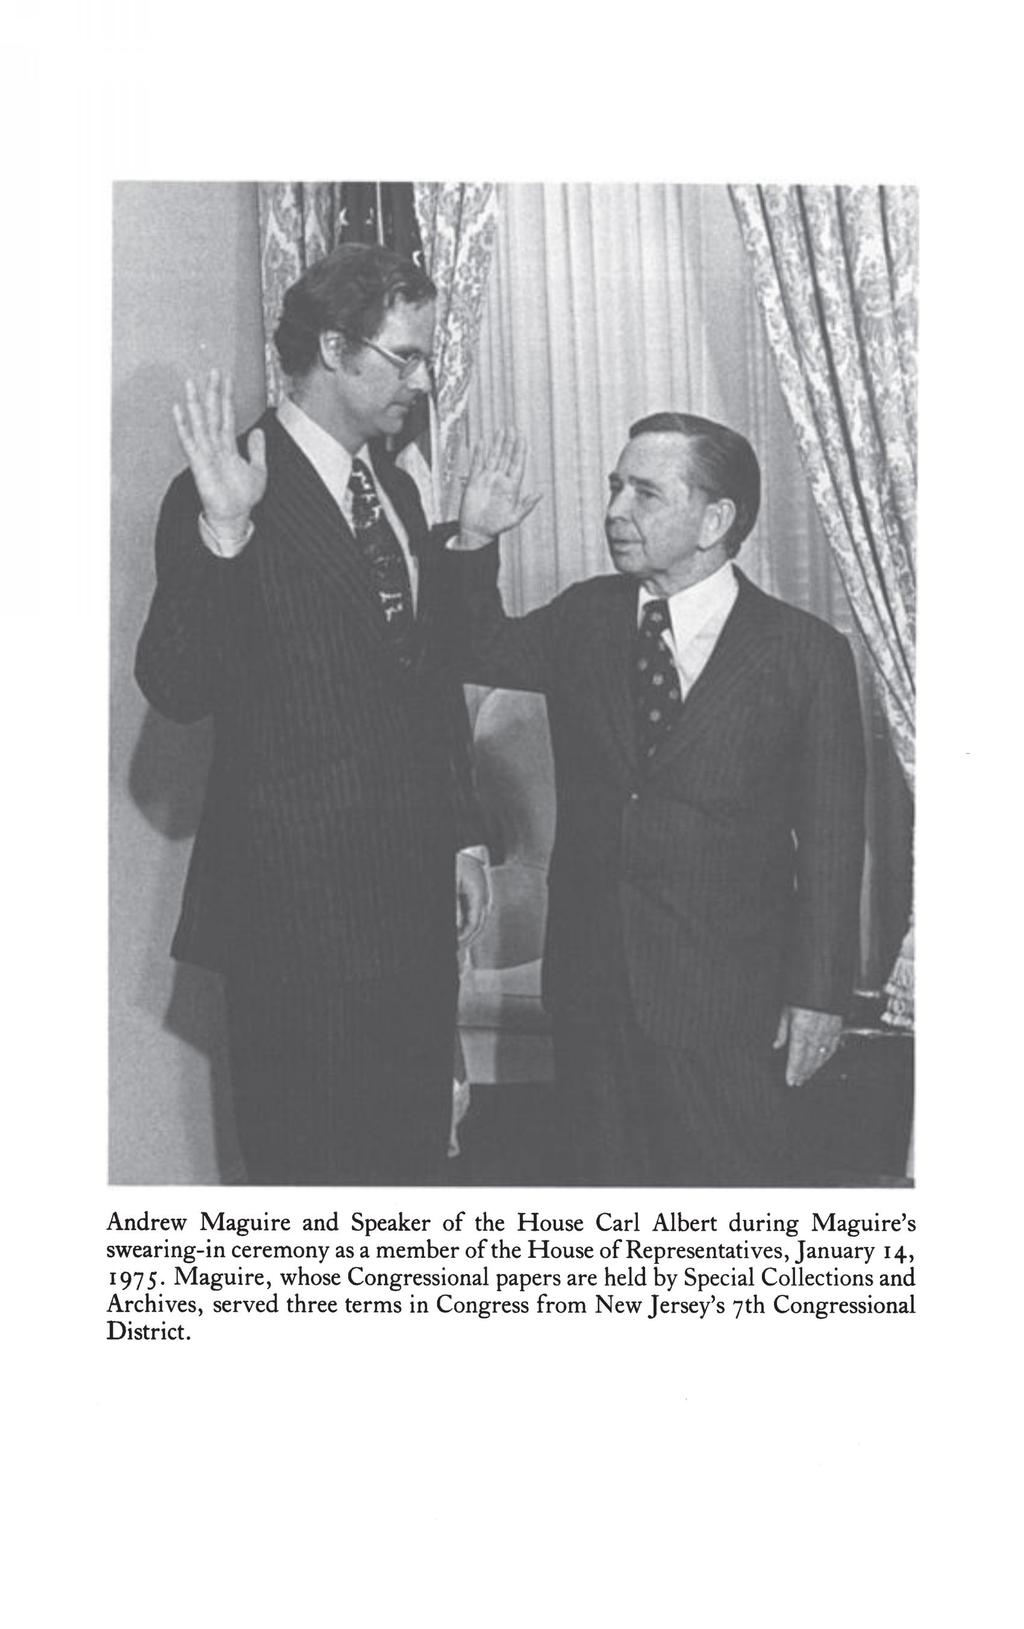 Andrew Maguire and Speaker of the House Carl Albert during Maguire's swearing-in ceremony as a member of the House of Representatives, January 14, 1975.